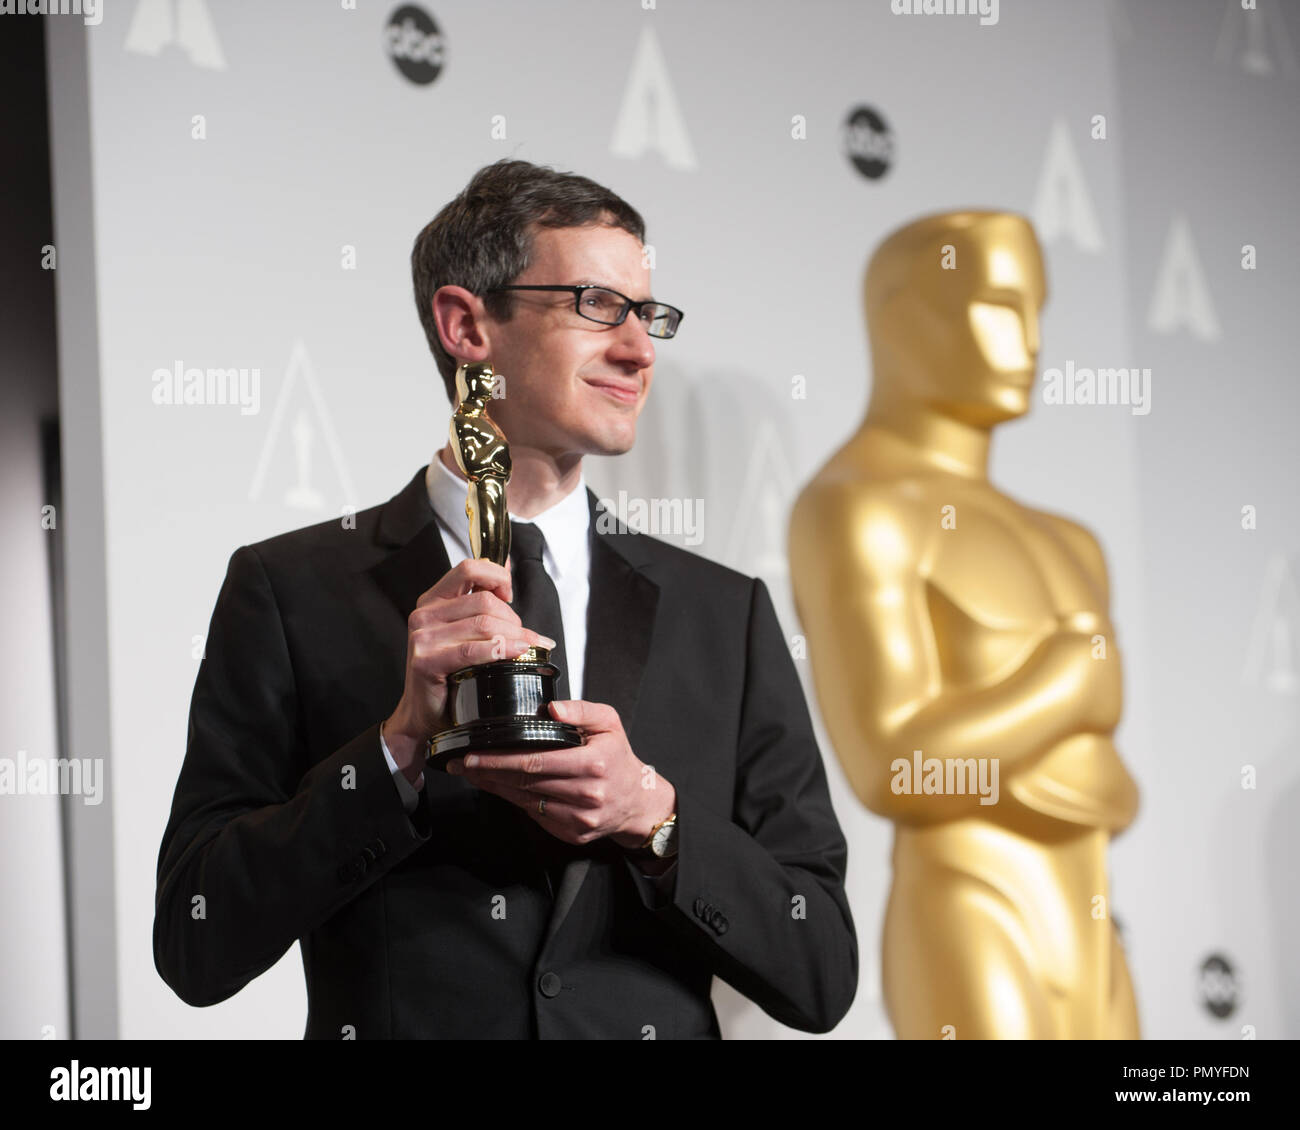 After winning the category Achievement in music written for motion pictures (Original score) for work on “Gravity”, Steven Price poses with his Oscar® for the press. The Oscars® are presented live on ABC from the Dolby® Theatre in Hollywood, CA Sunday, March 2, 2014.  File Reference # 32268 303  For Editorial Use Only -  All Rights Reserved Stock Photo